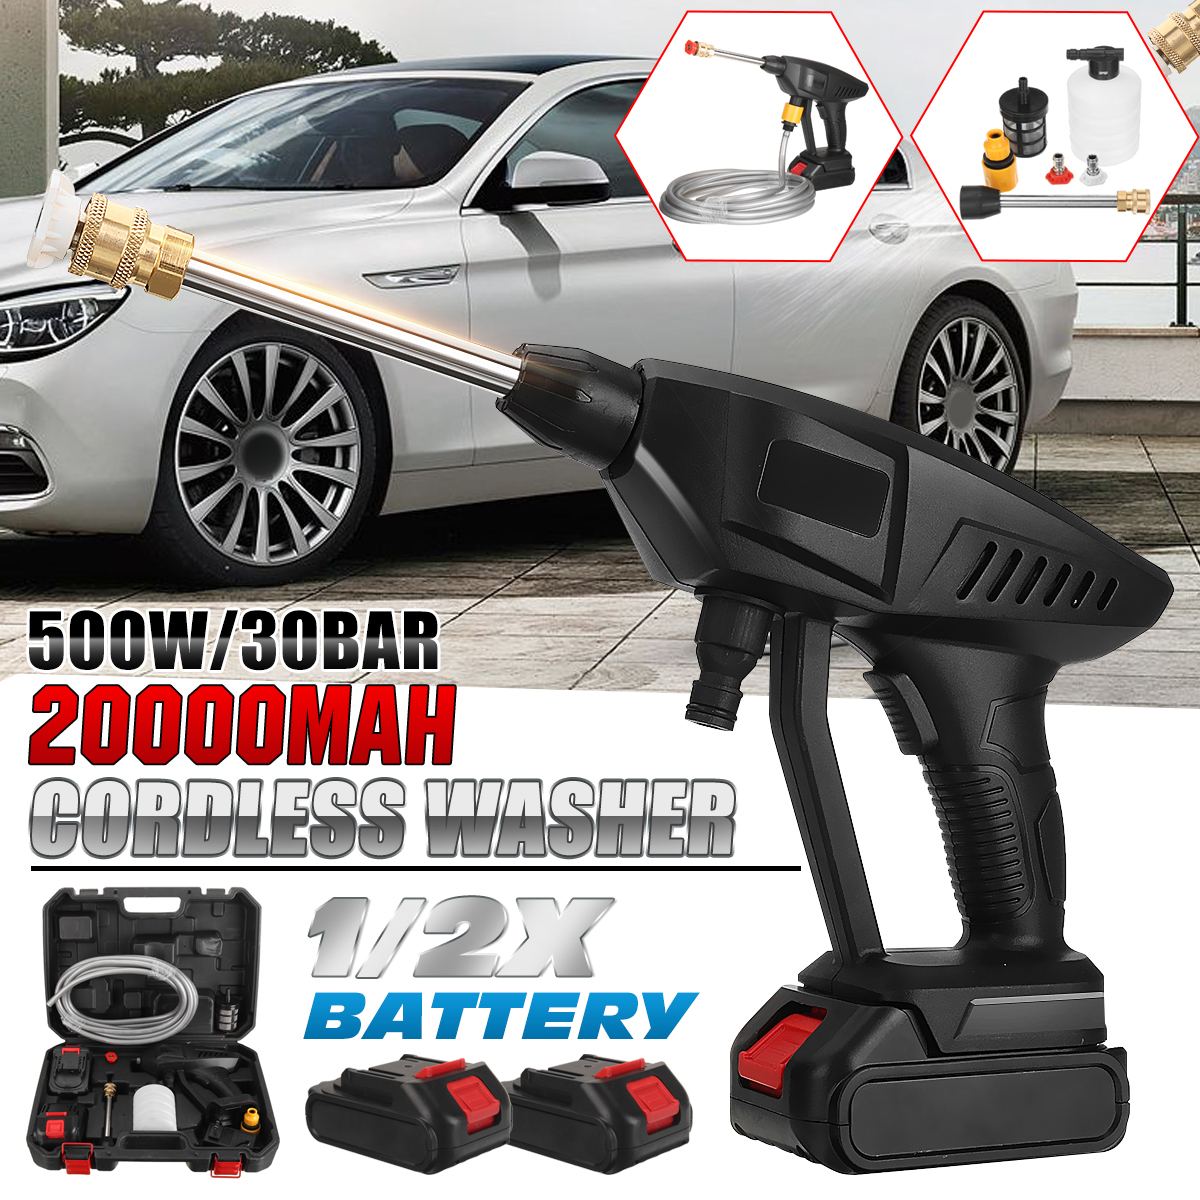 288VF-Cordless-Electric-High-Pressure-Washer-Car-Cleaner-Water-Spray-Guns-Water-Hose-Cleaning-Washin-1869047-1